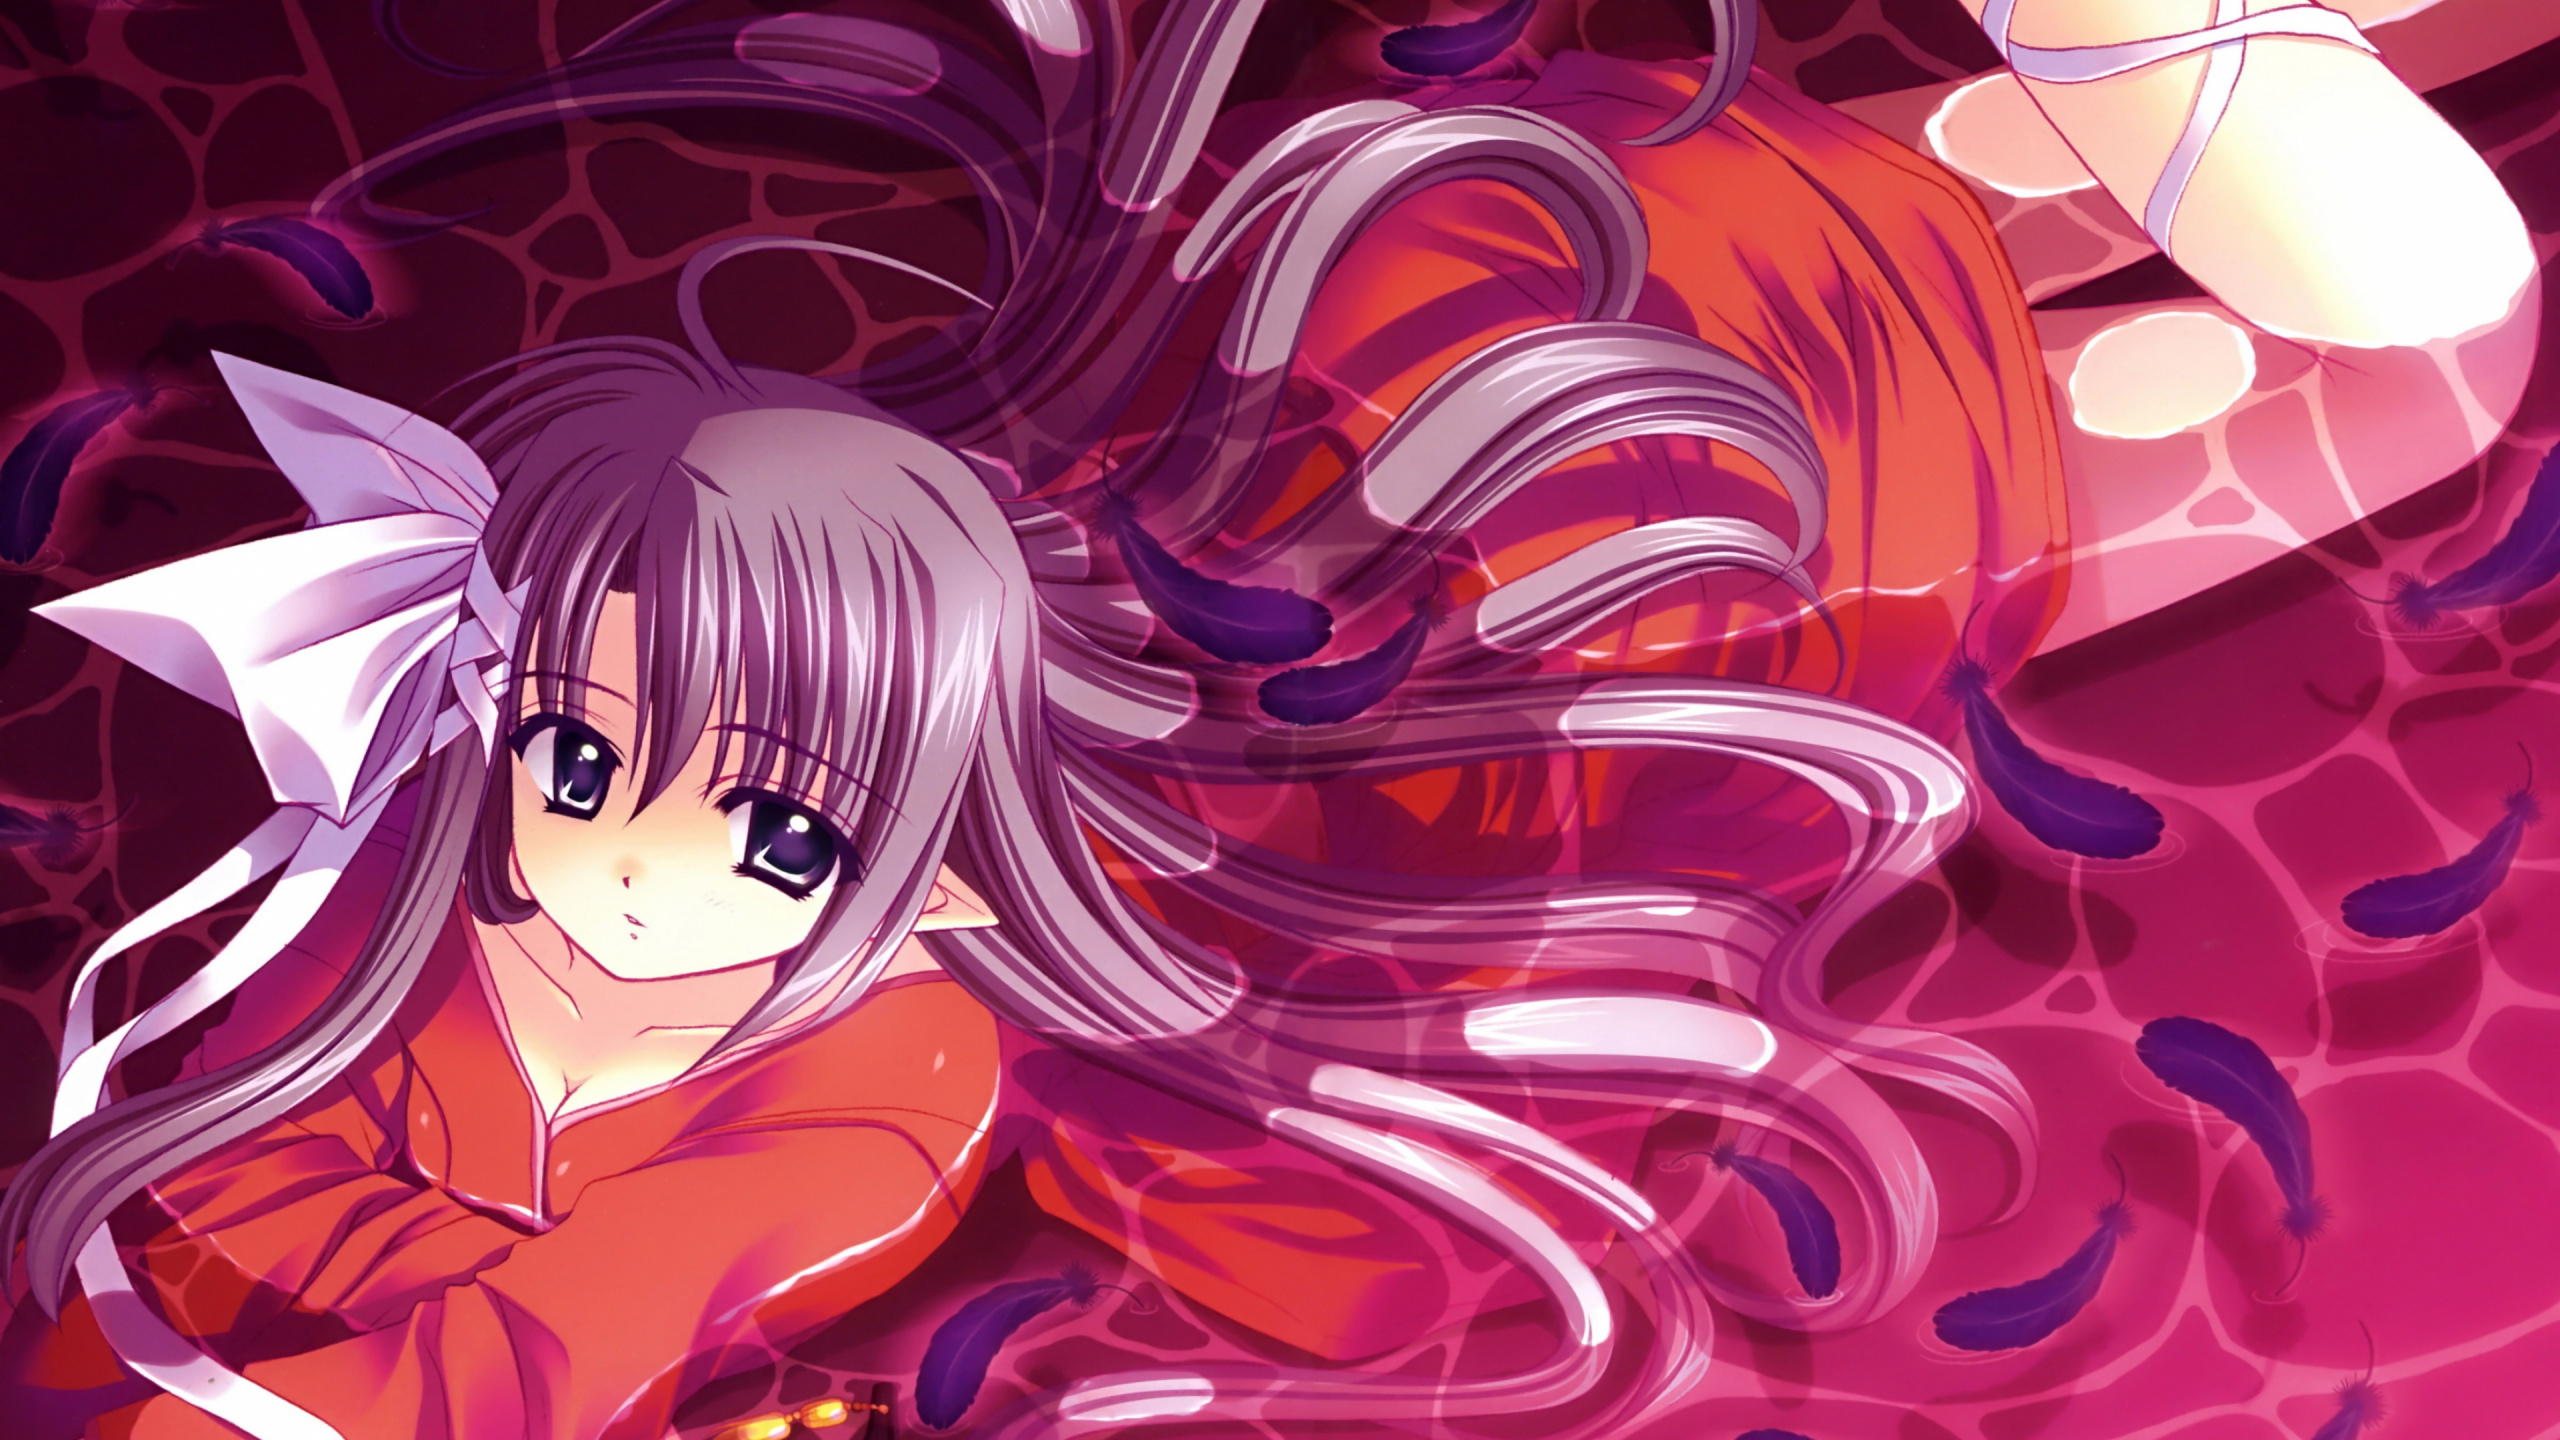 Personnage D'anime Fille Aux Cheveux Rouges. Wallpaper in 2560x1440 Resolution